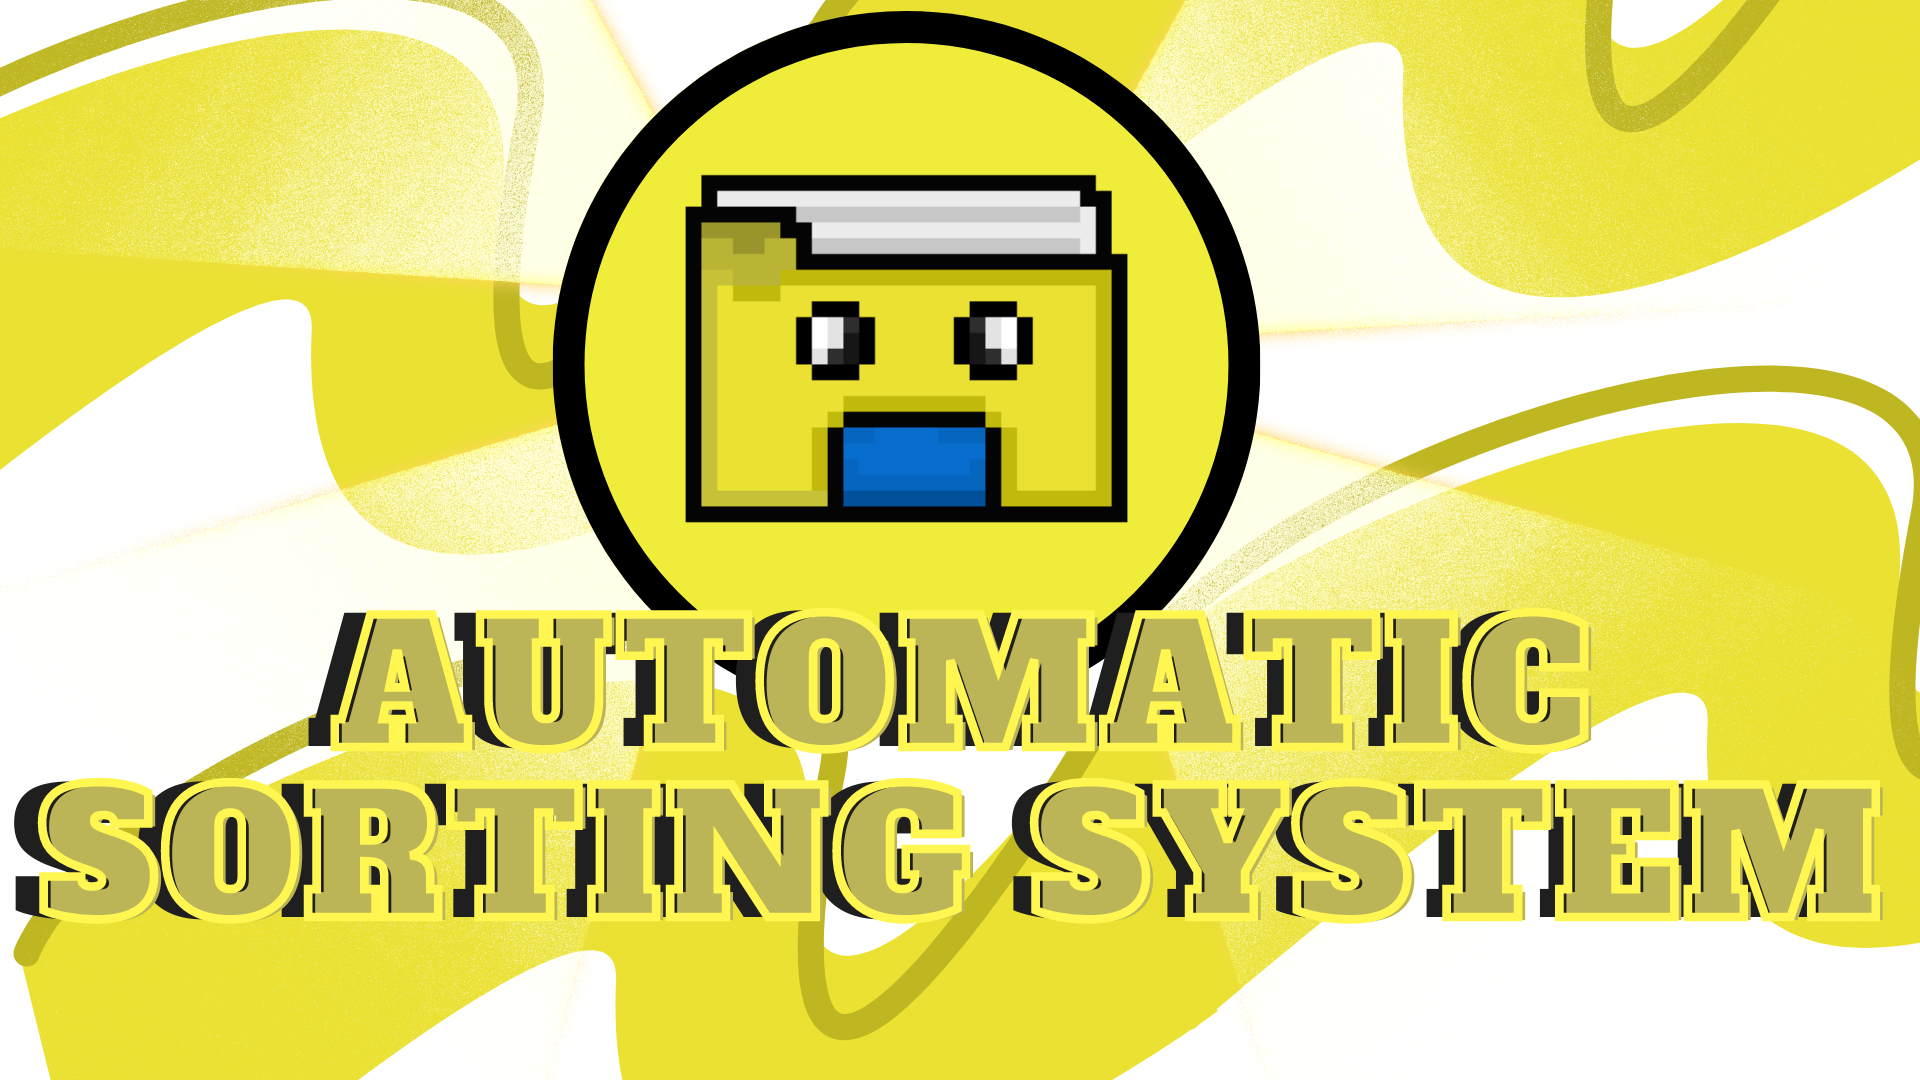 Automatic sorting system (ASS)